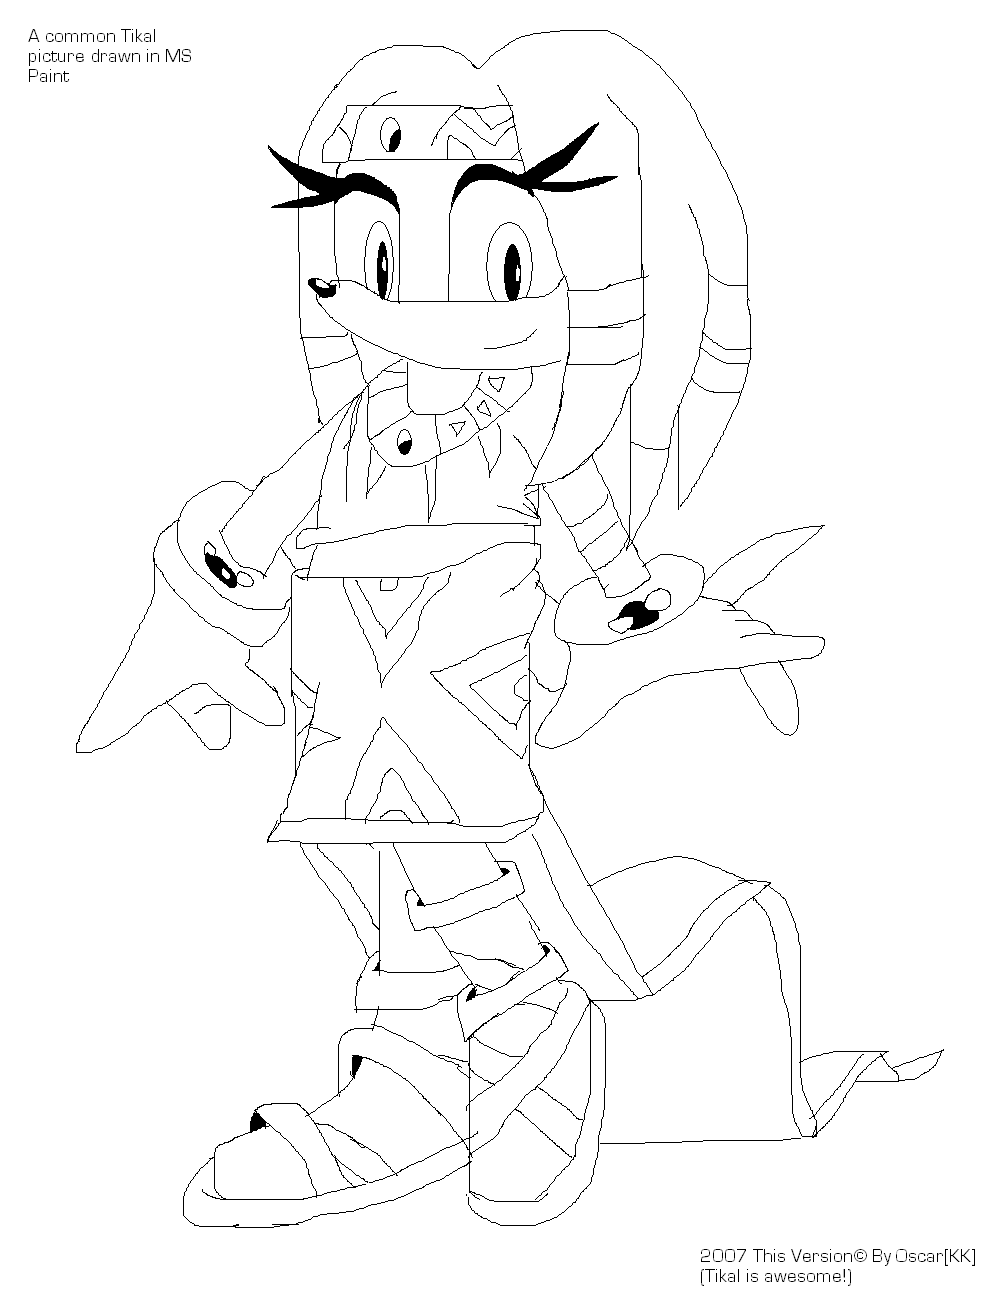 A common Tikal picture drawn in MS paint by Oscar666